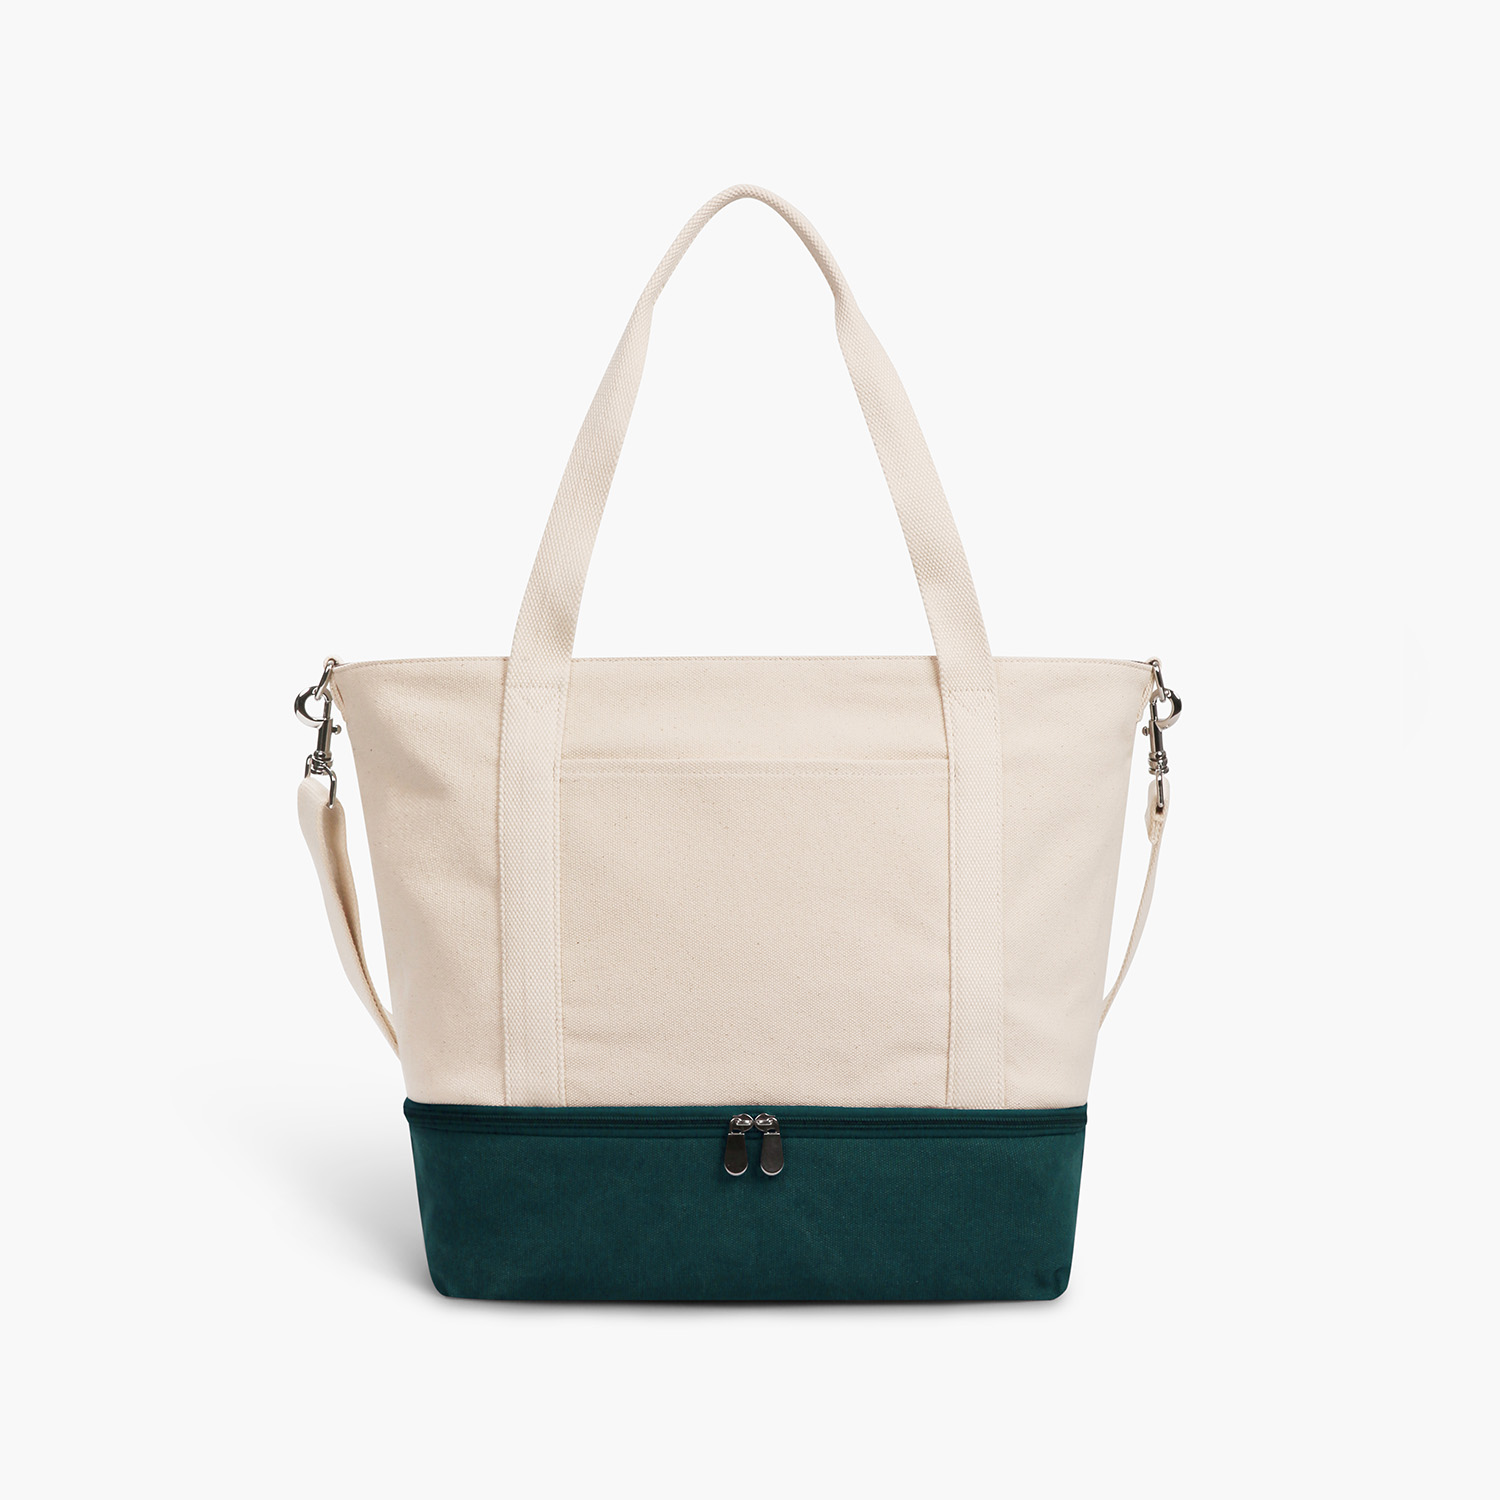 Shop Catalina Deluxe Tote